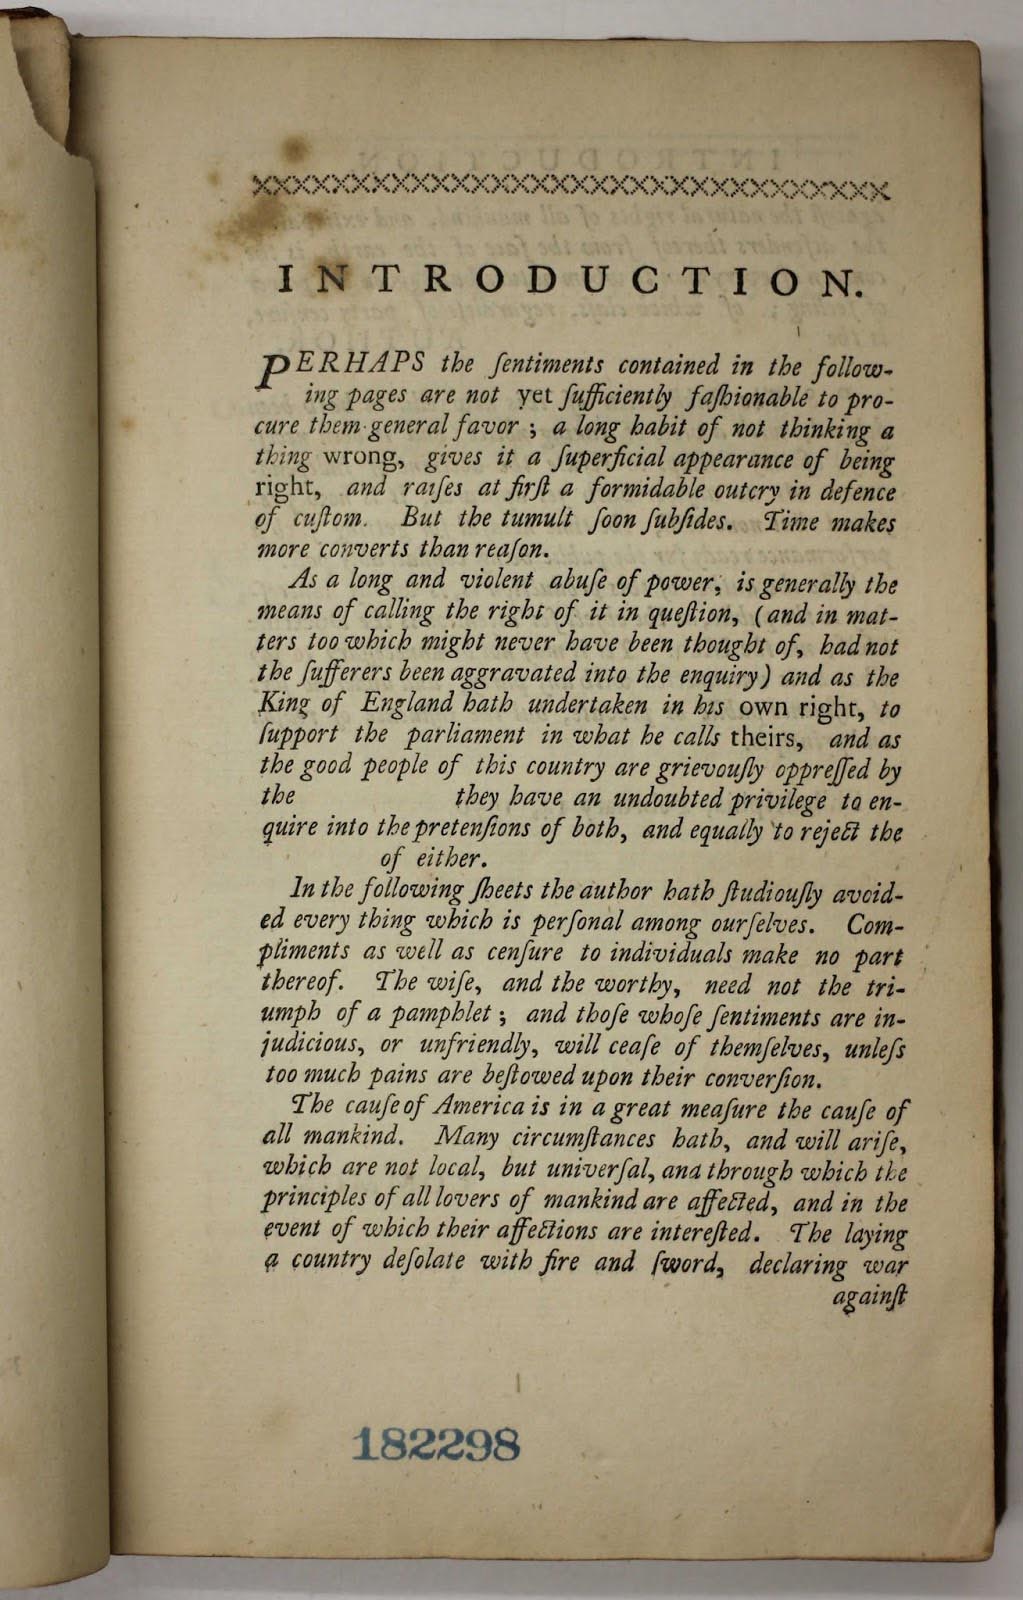 Introduction page from Thomas Paine's "Common Sense"